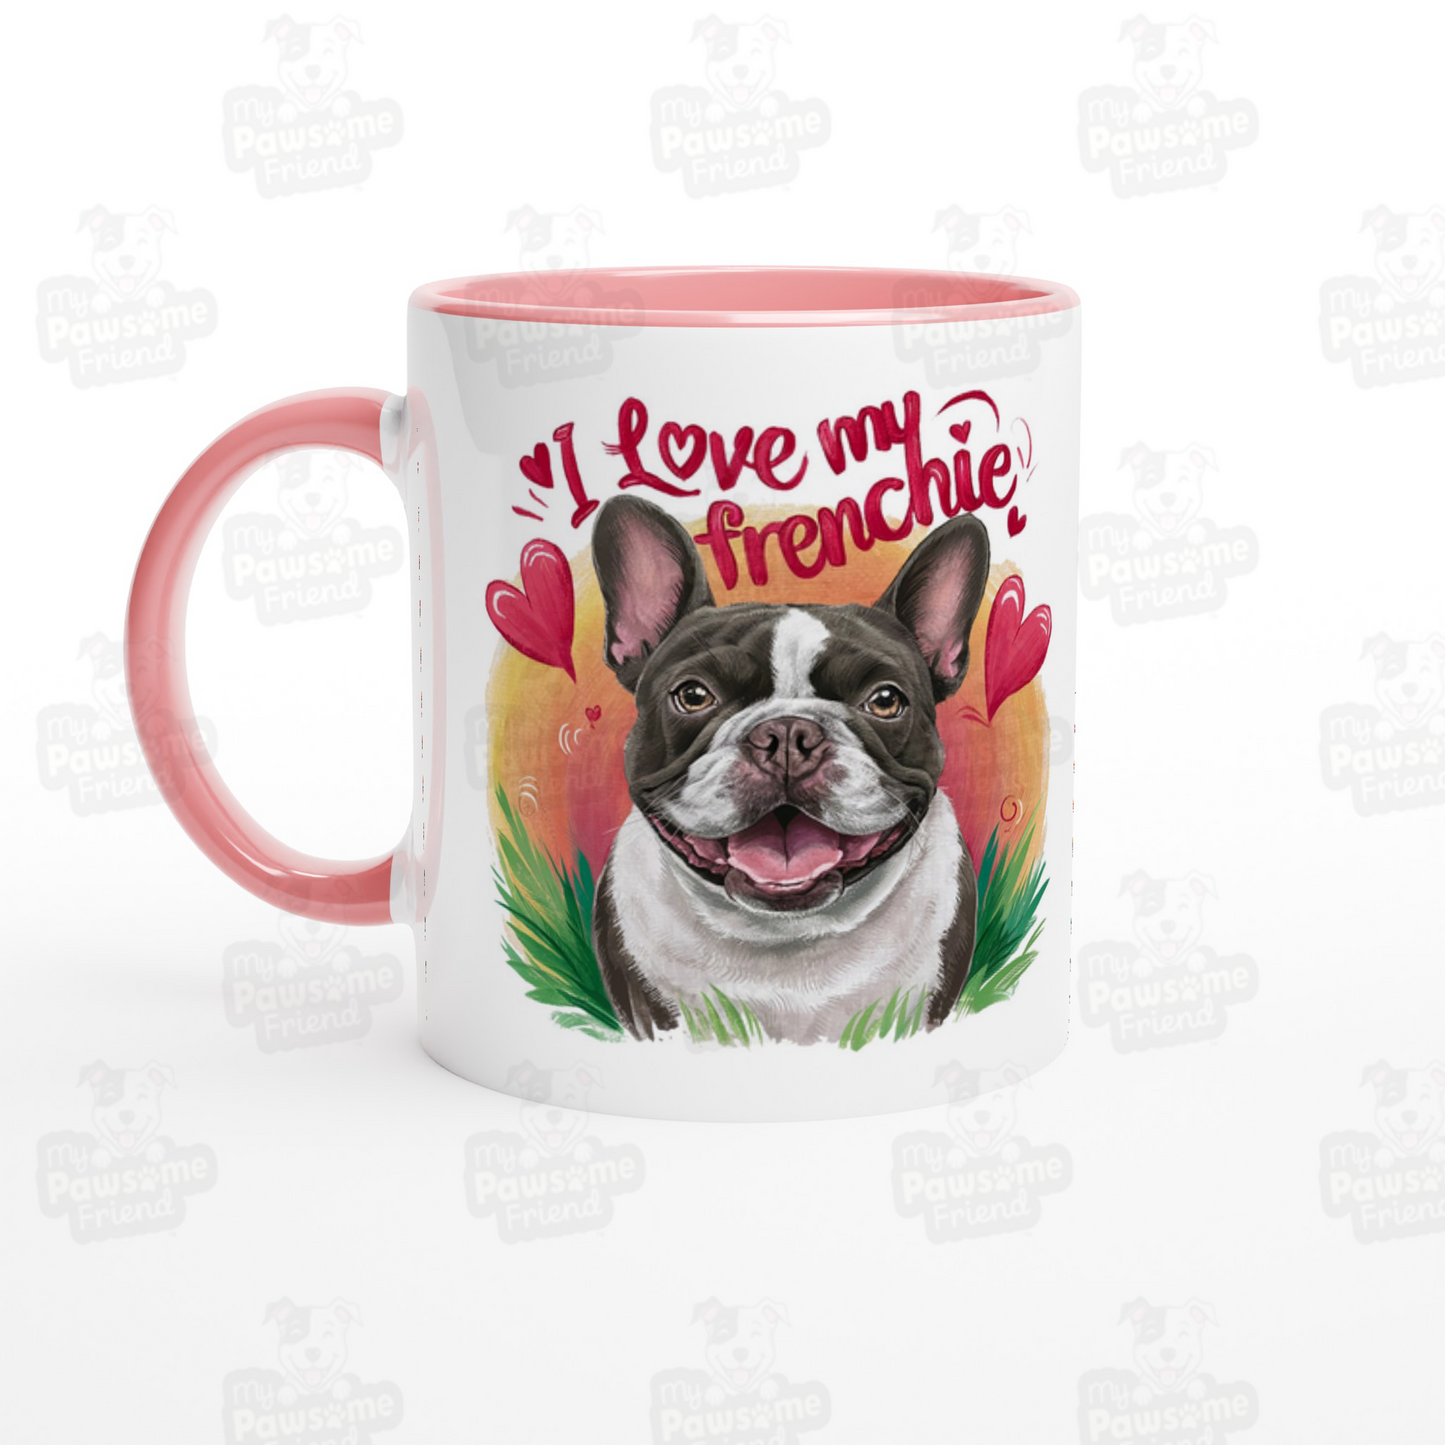 A coffee mug with a cute design featuring a french bulldog smiling surrounded by heart designs, and the phrase "I love my Frenchie". The handle color of the coffee mug is pink